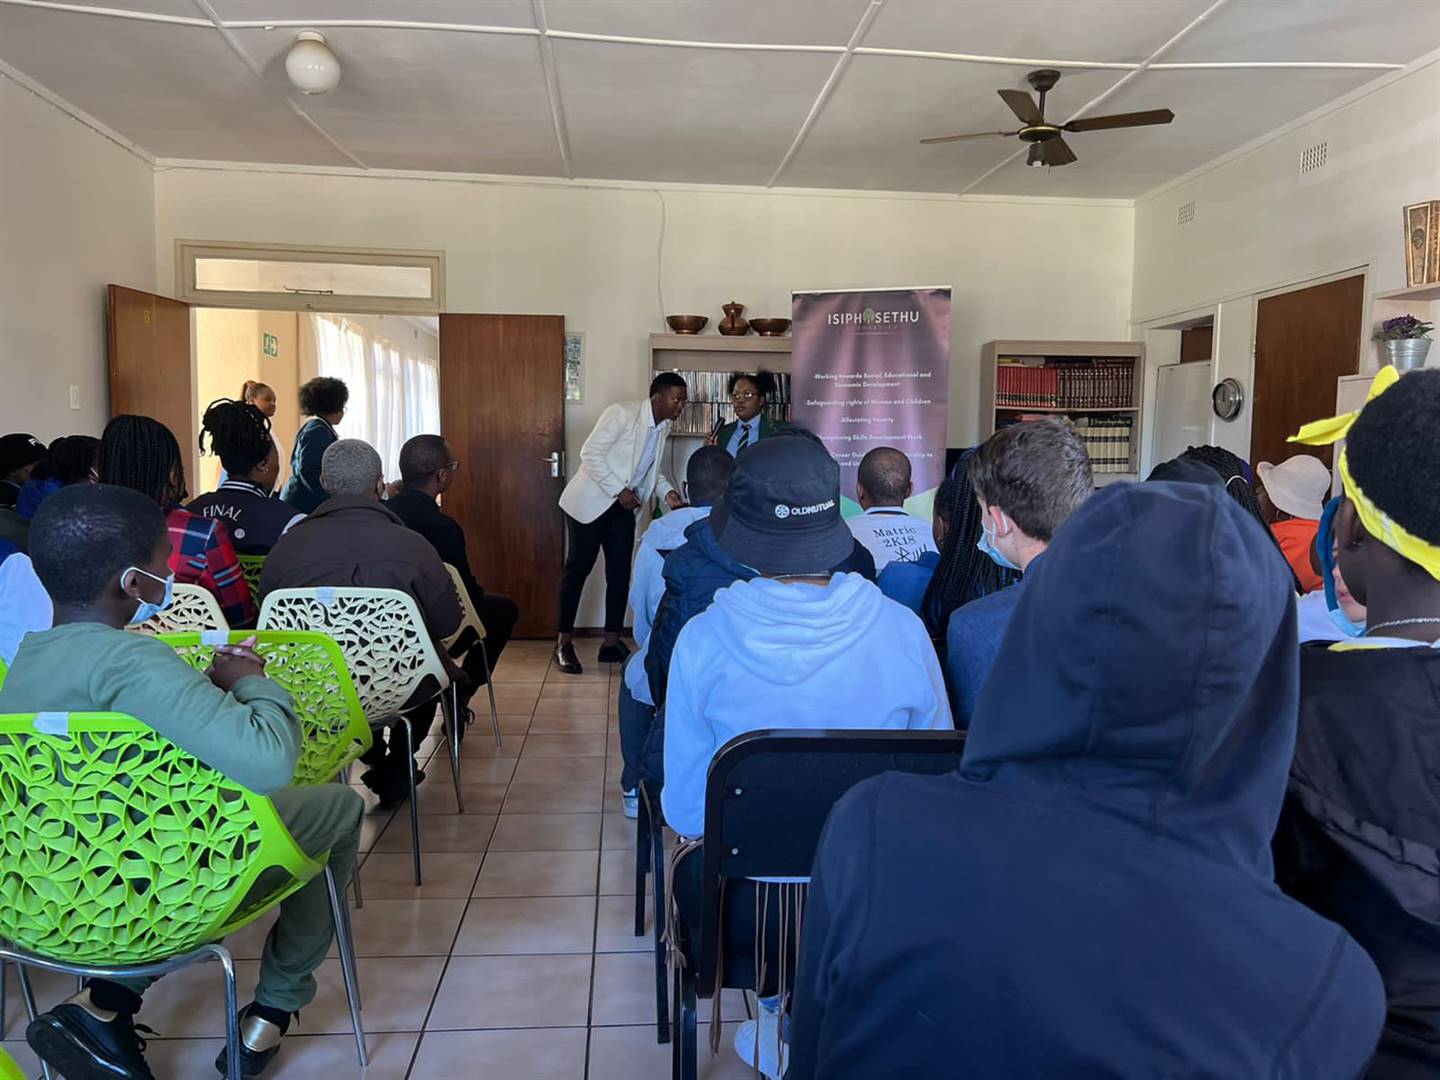 Pupils learn about careers opportunities in various fields. Photo: Kopano Monaheng